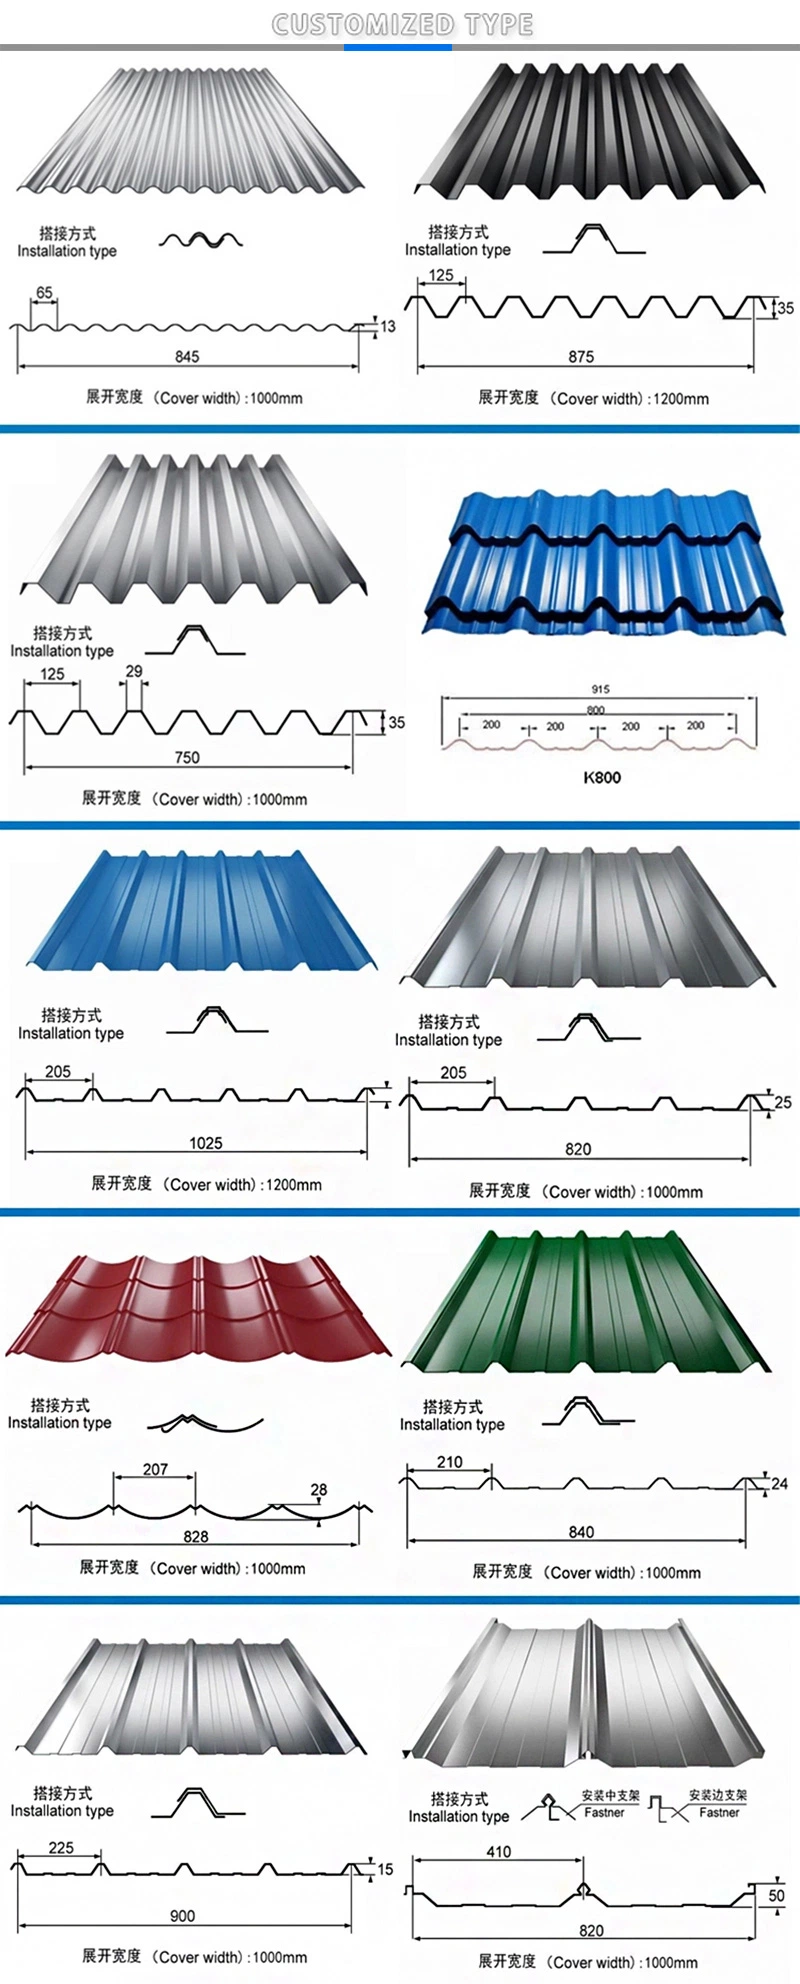 Roof Material Emboss Galvanized Ibr Roof Sheet Prices